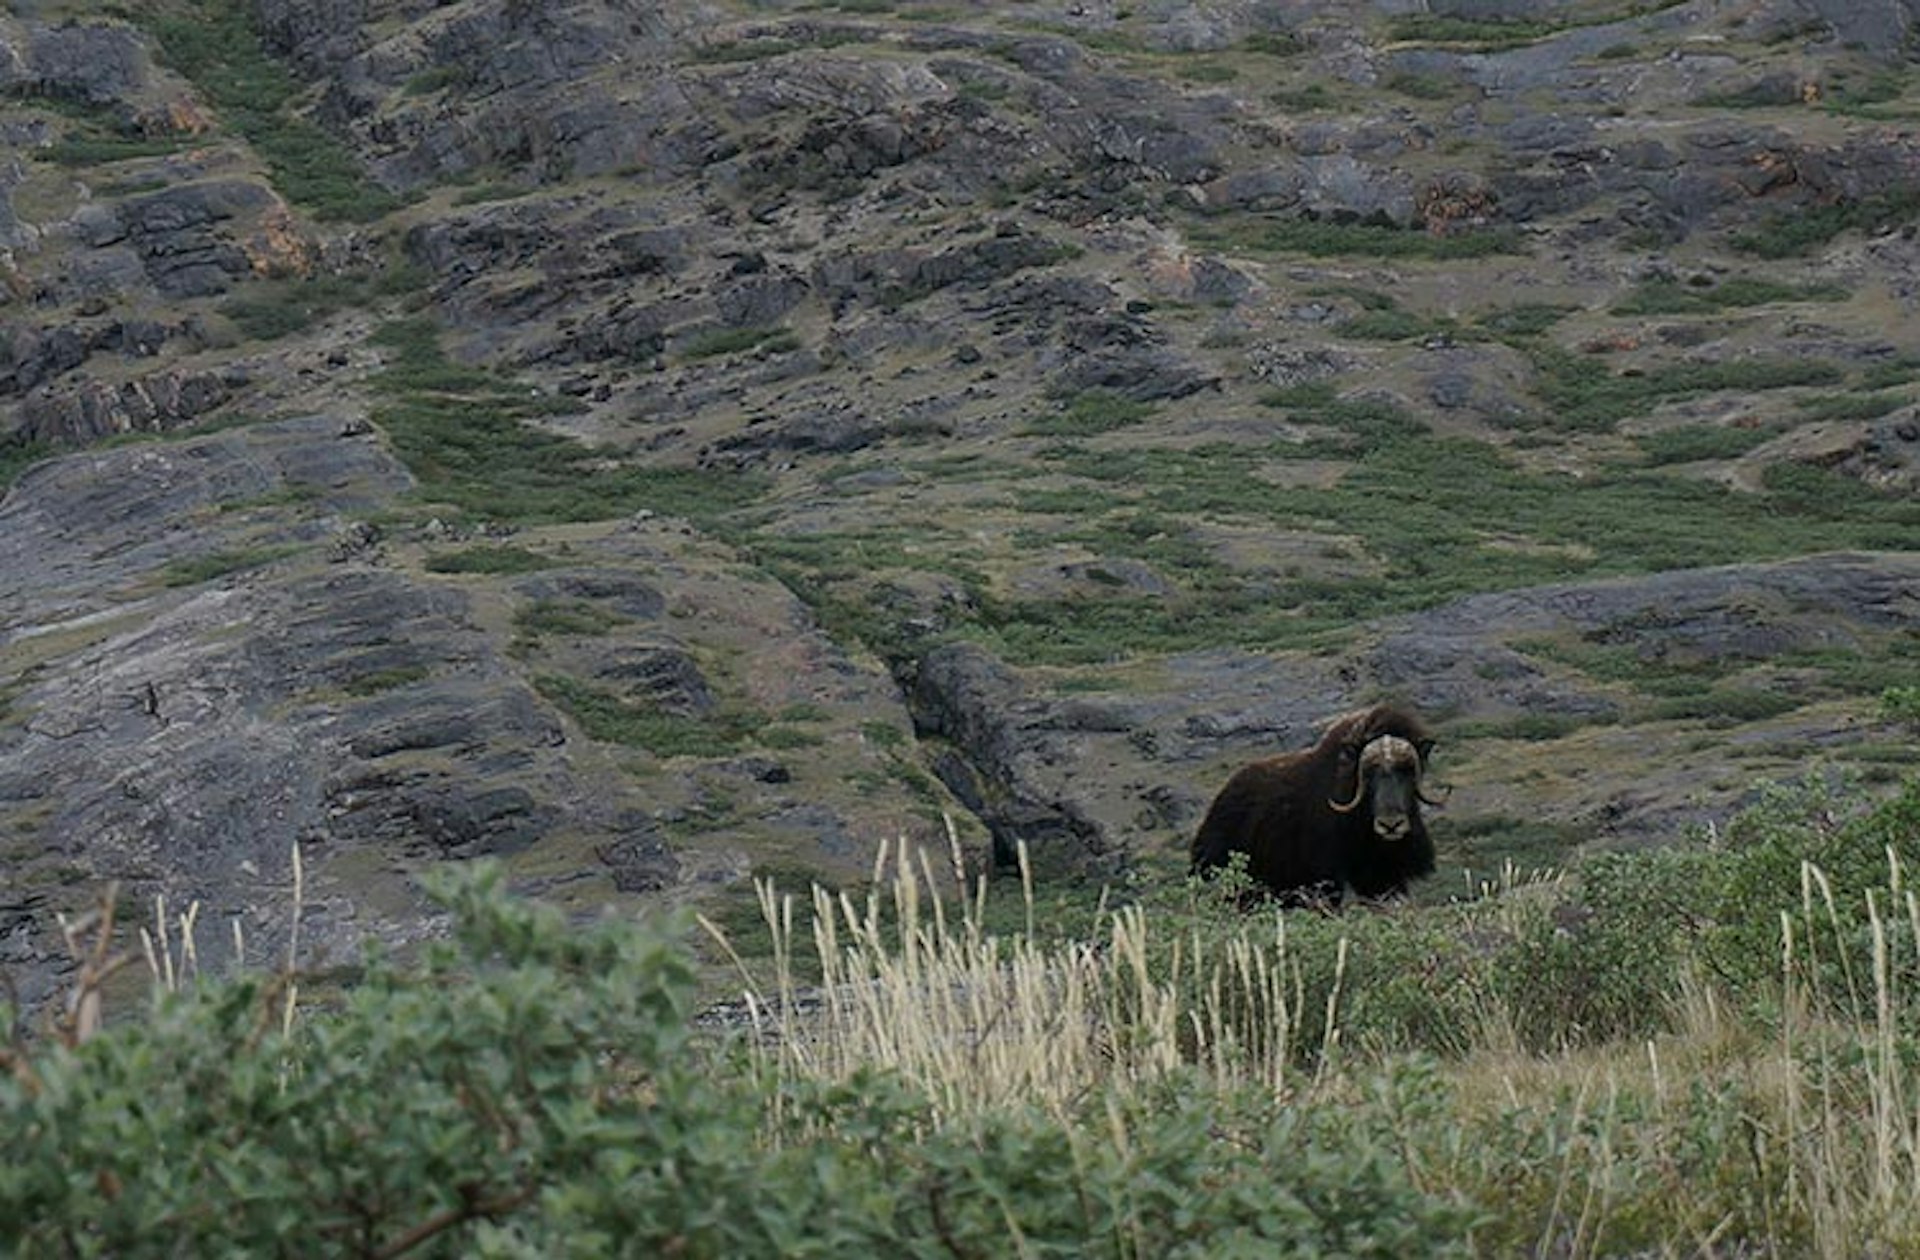 A single muskox, with a dark shaggy body and large curved horns, stands on a grassy verge against a rock face near Kangerlussuaq, Greenland